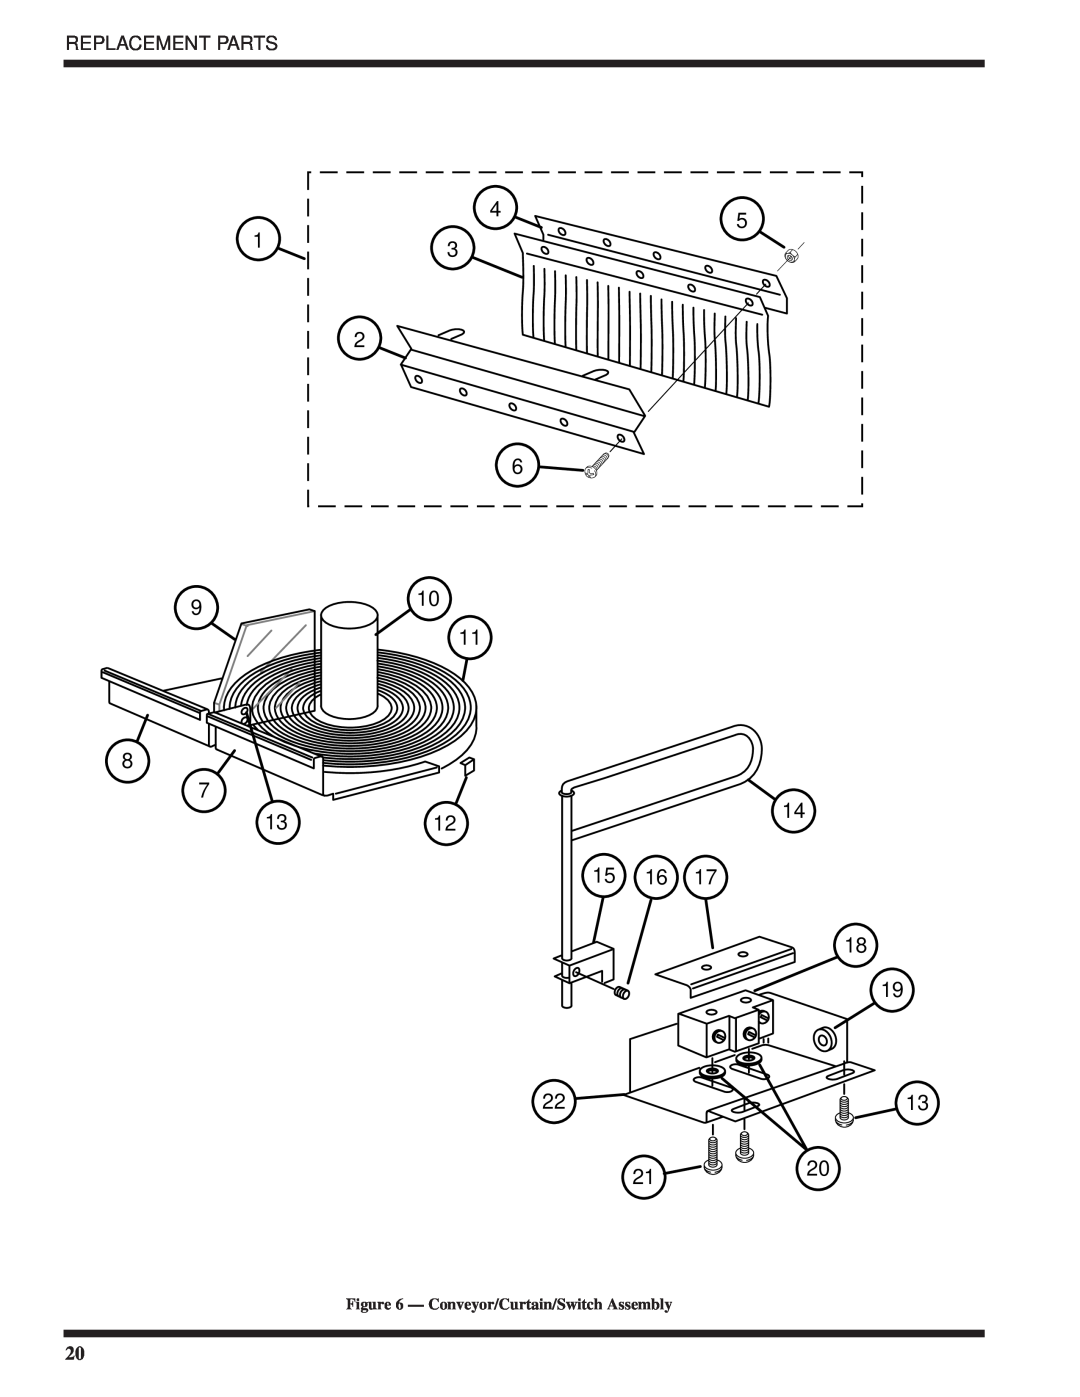 Moyer Diebel DF1-M6, DF-M6, DF2-M6 technical manual 1312, Replacement Parts, Conveyor/Curtain/Switch Assembly 